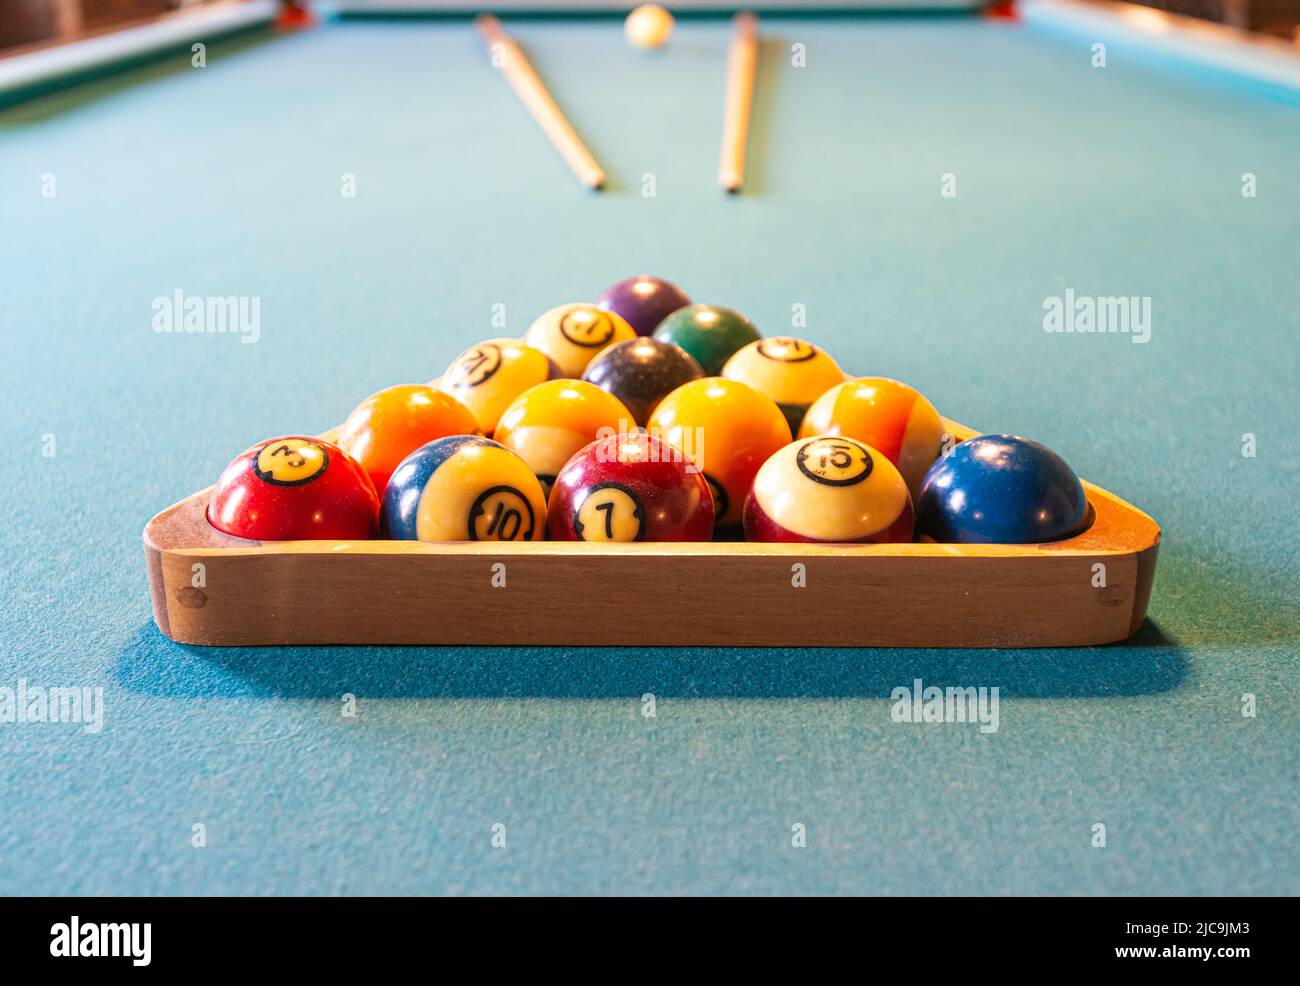 Billiard table with balls and cues Stock Photo